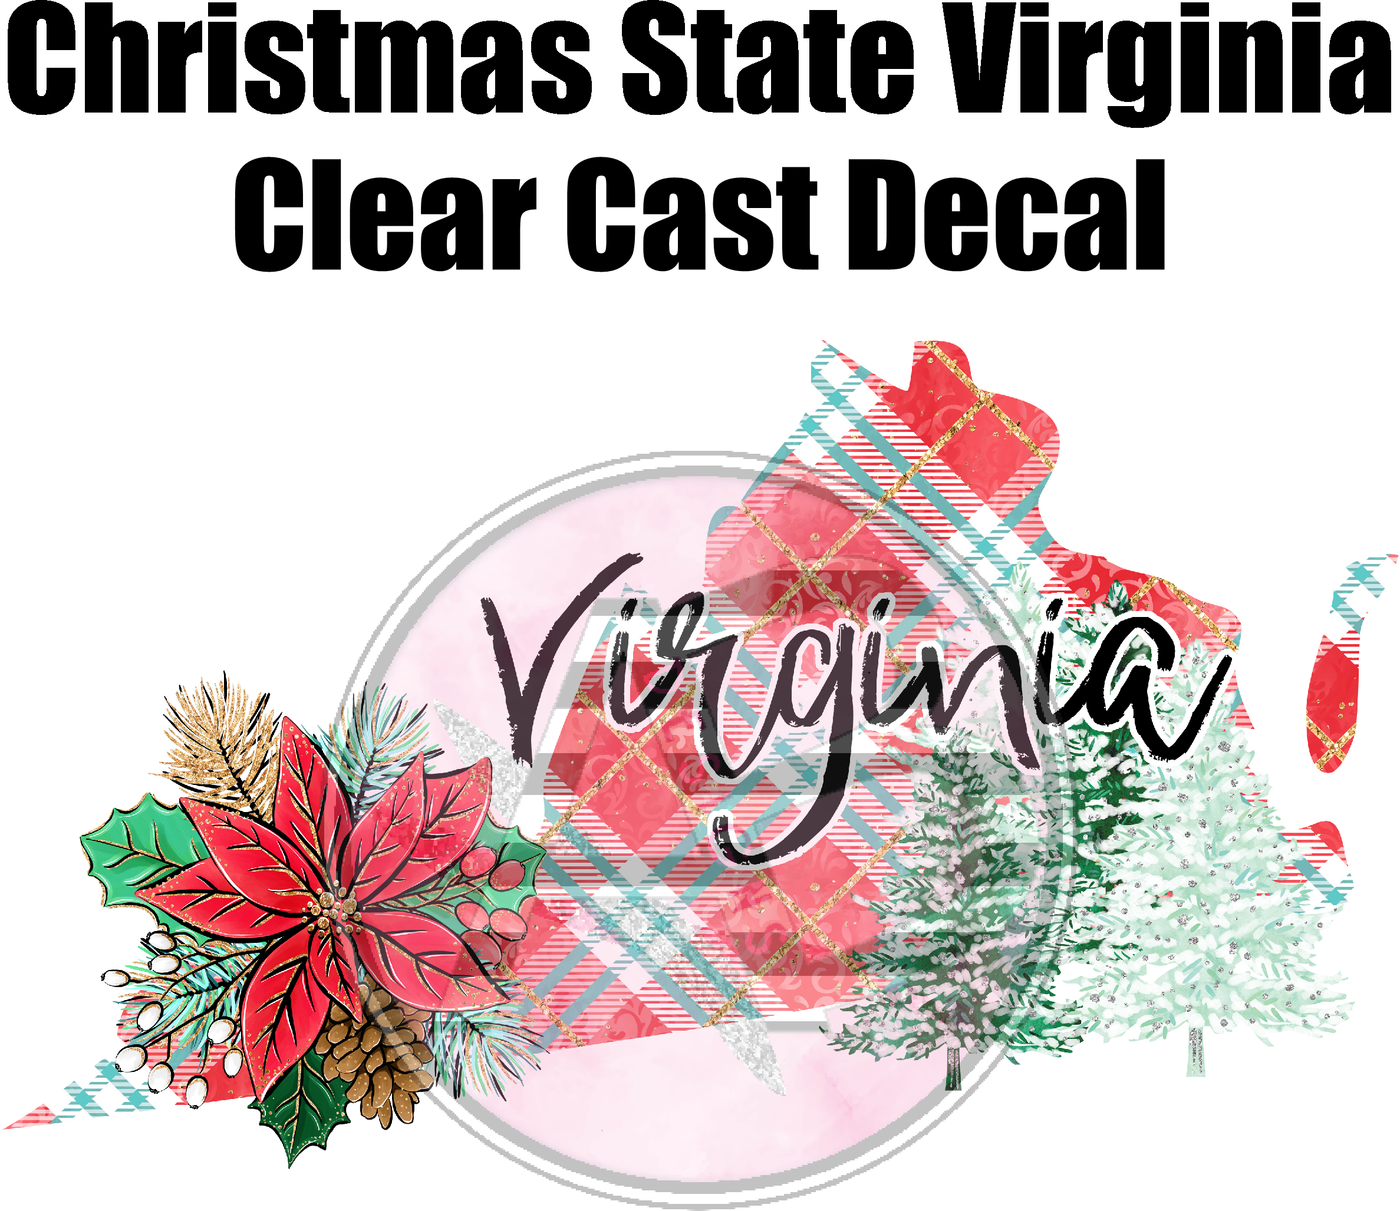 Christmas State Virginia - Clear Cast Decal